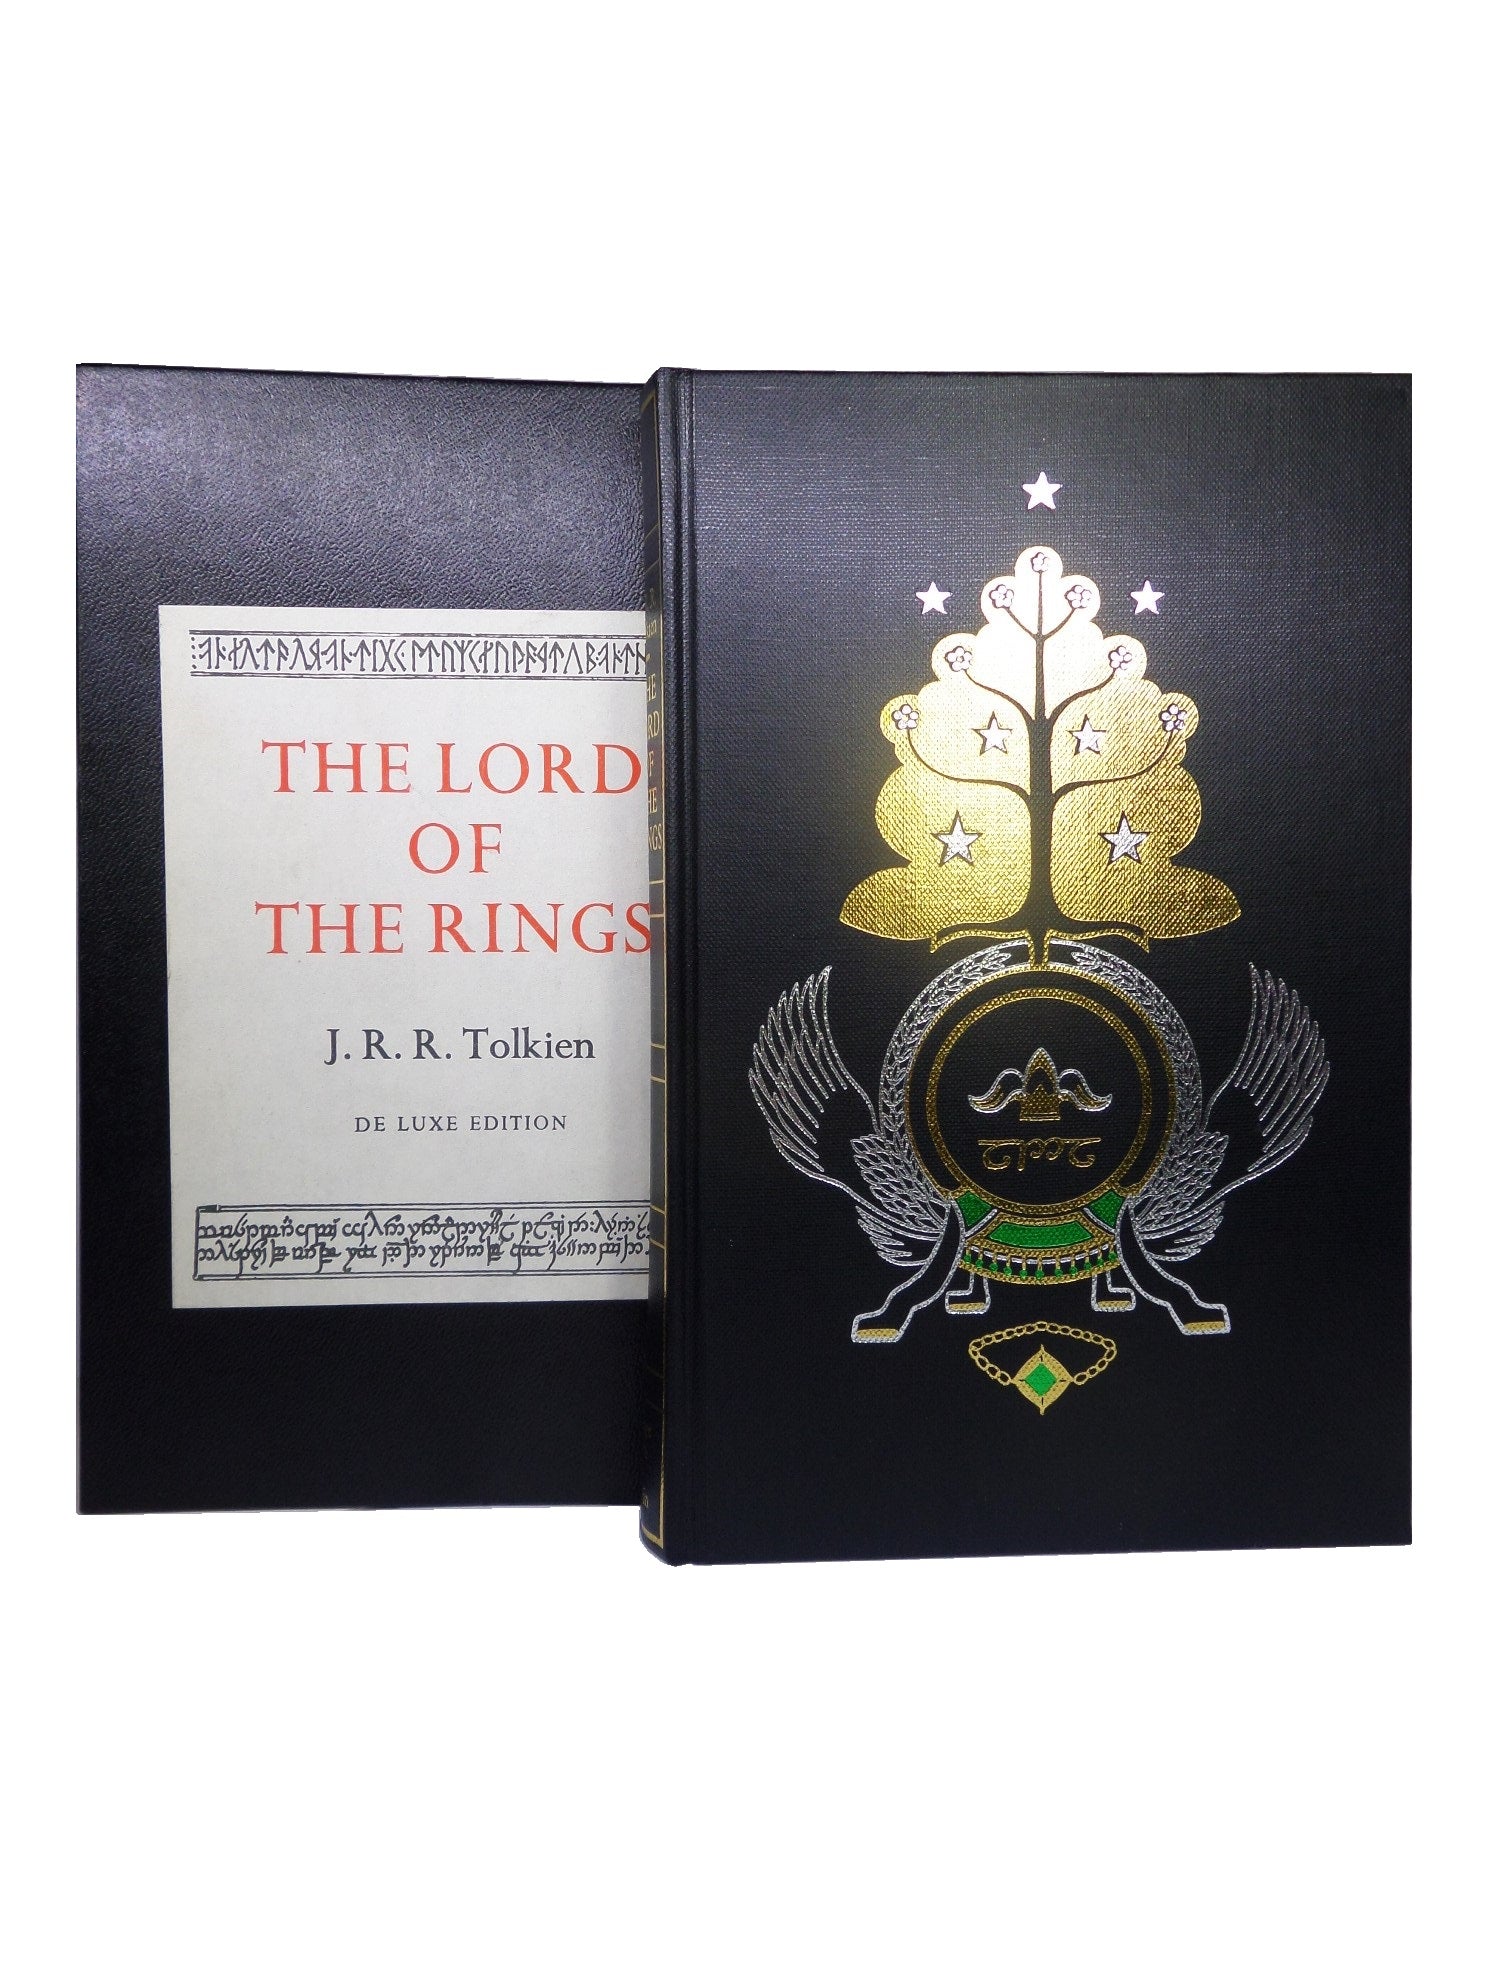 THE LORD OF THE RINGS TRILOGY BY J.R.R. TOLKIEN 1979 FINE DELUXE EDITION